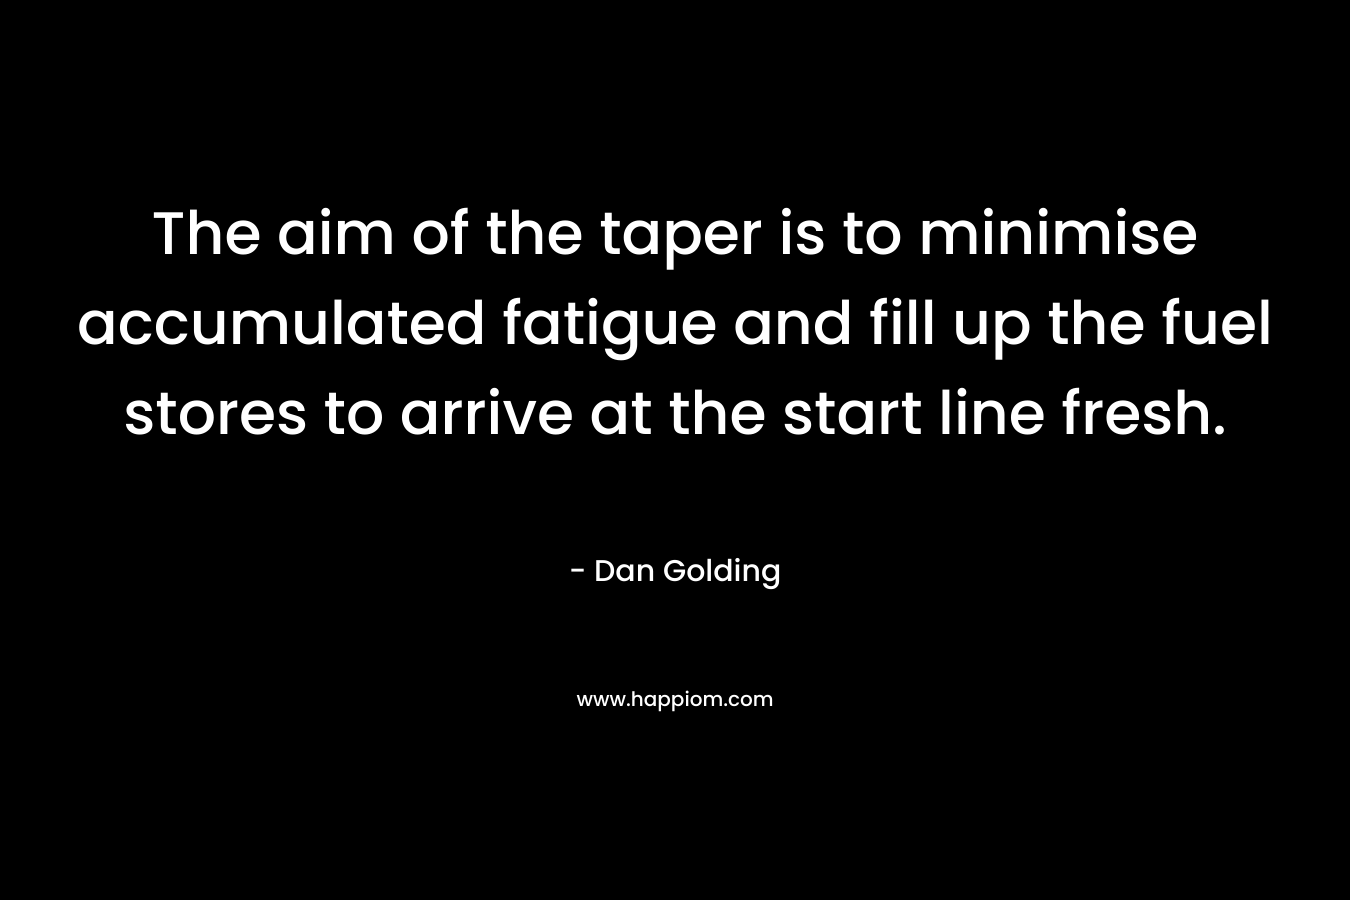 The aim of the taper is to minimise accumulated fatigue and fill up the fuel stores to arrive at the start line fresh. – Dan Golding